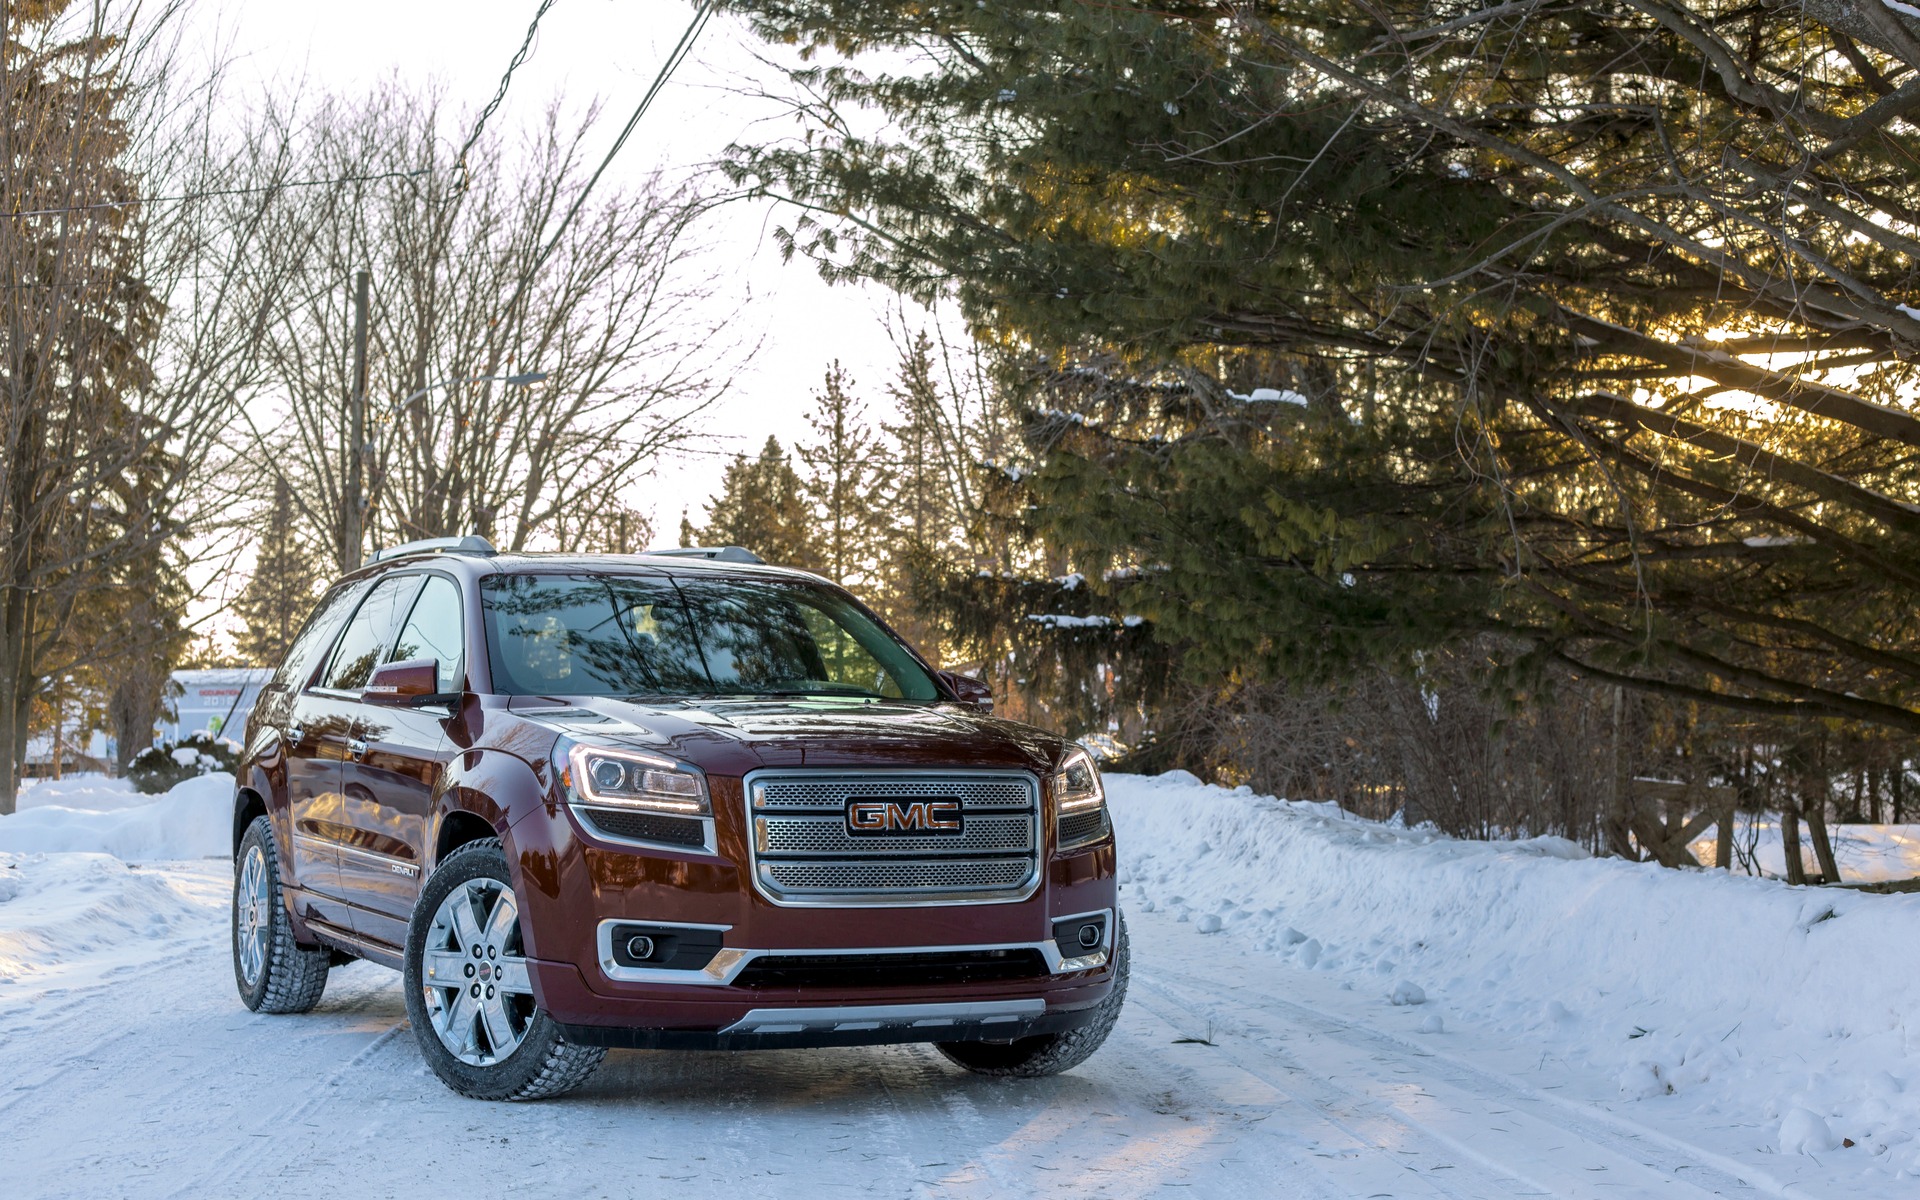 2016 Gmc Acadia News Reviews Picture Galleries And Videos The Car